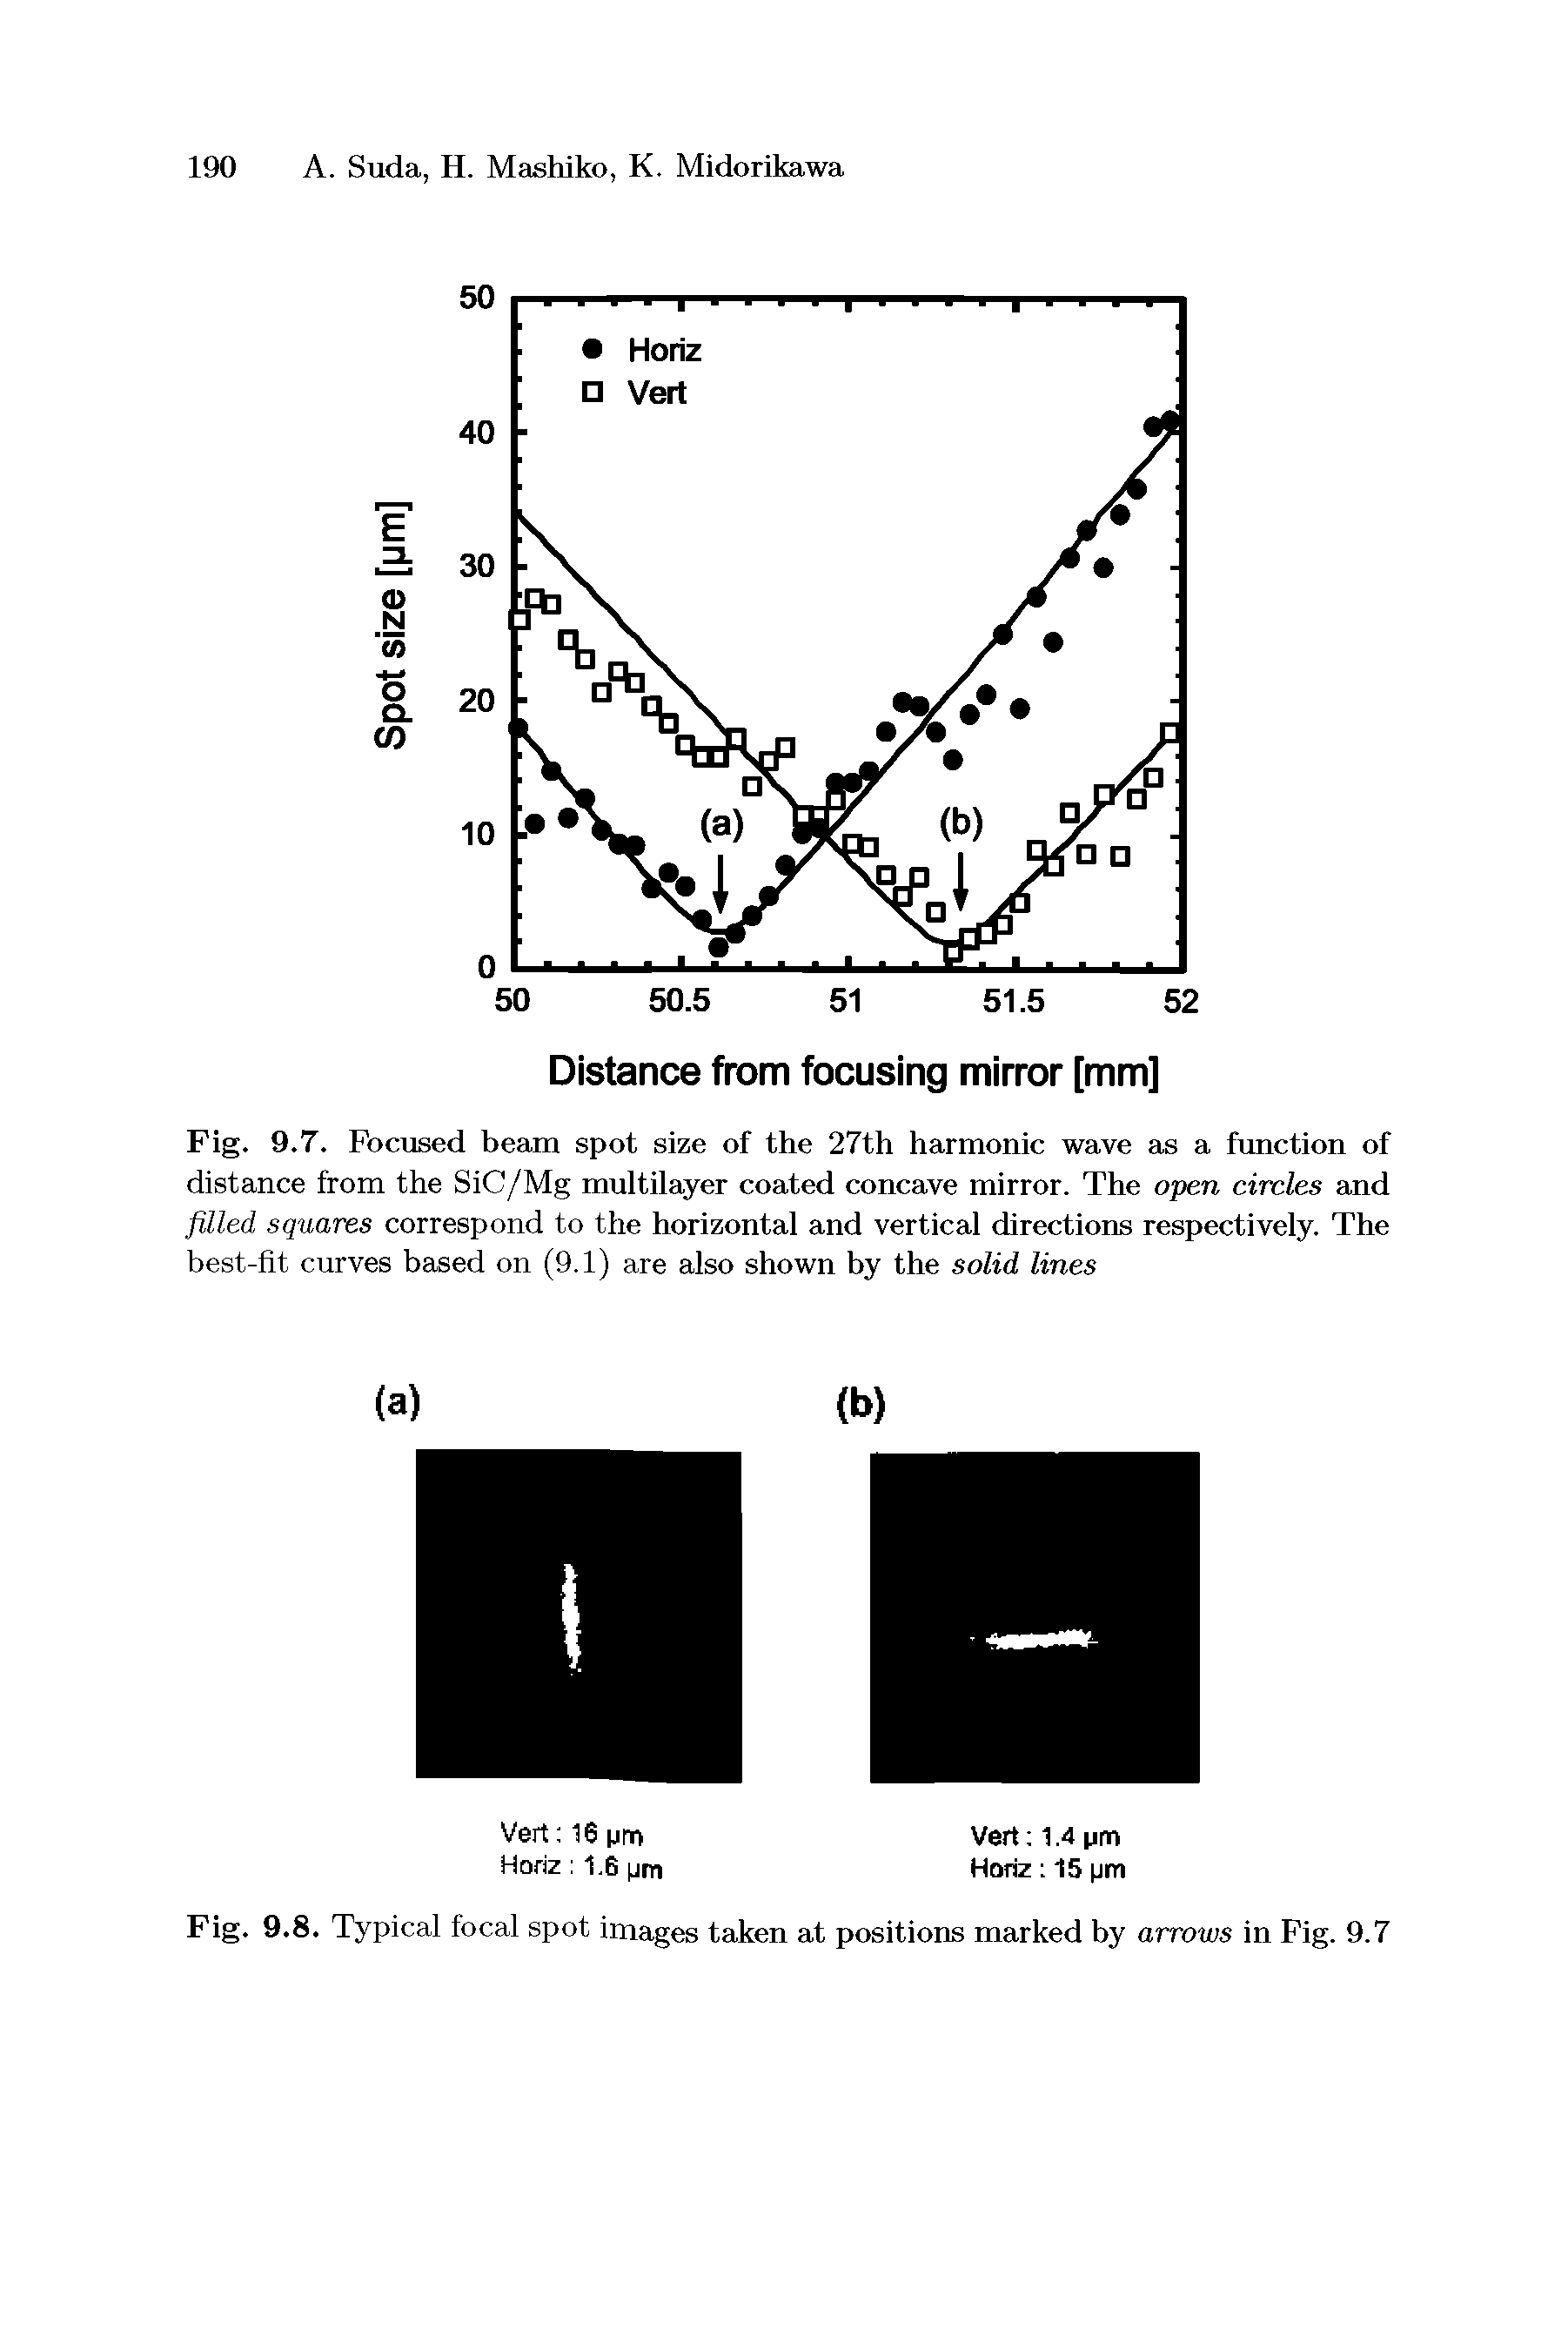 Fig. 9.7. Focused beam spot size of the 27th harmonic wave as a function of distance from the SiC/Mg multilayer coated concave mirror. The open circles and filled squares correspond to the horizontal and vertical directions respectively. The best-fit curves based on (9.1) are also shown by the solid lines...